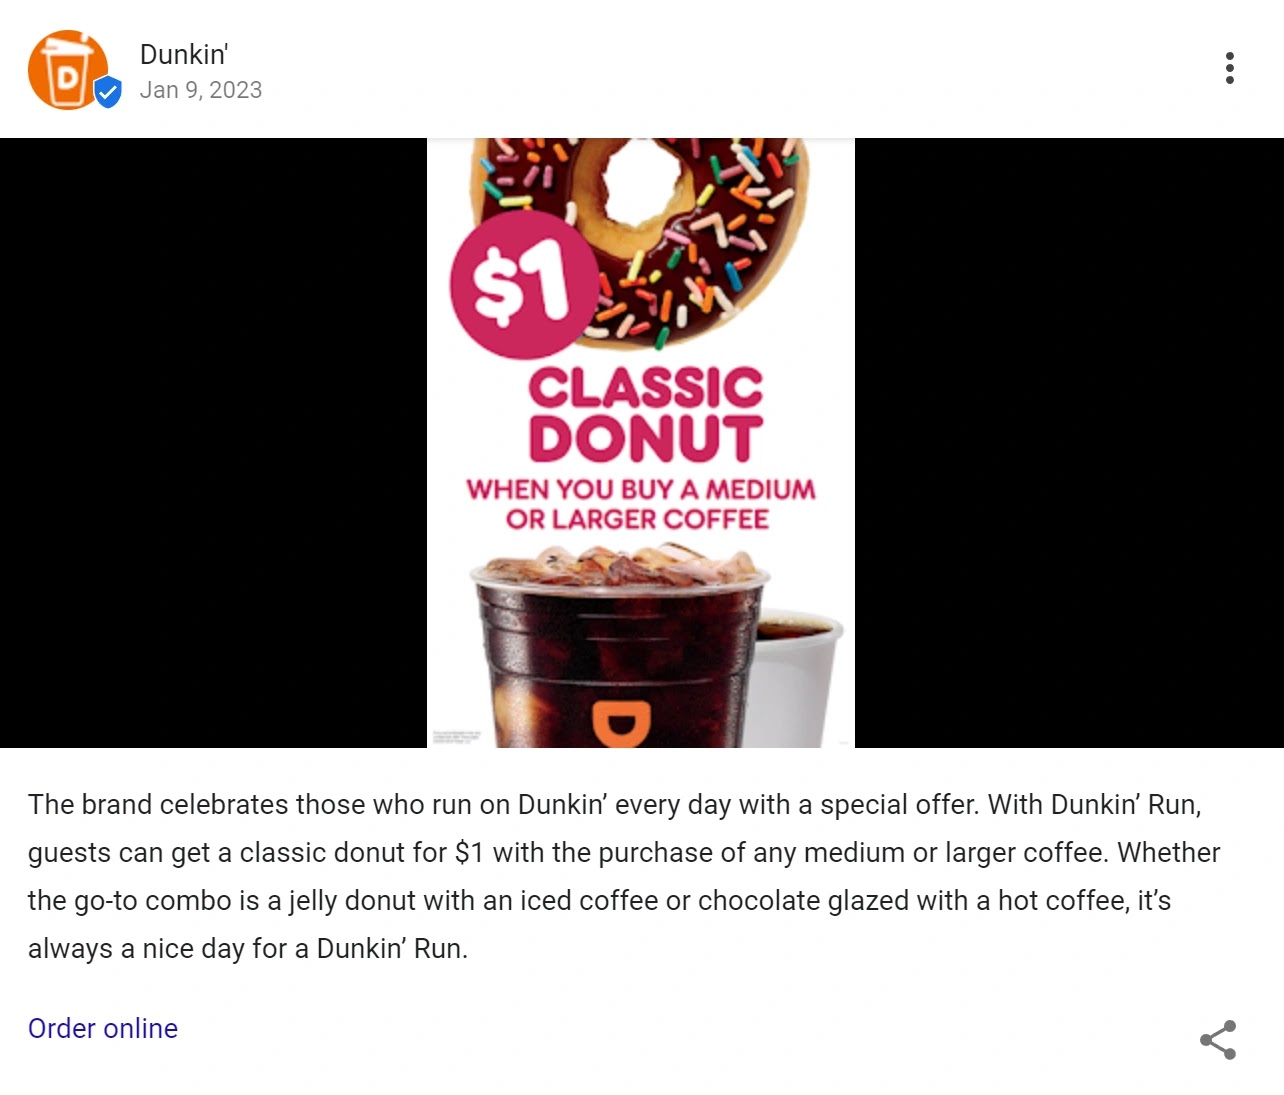 Dunkin' Donuts' Google Business Profile station  announcing a peculiar   $1 donut offer